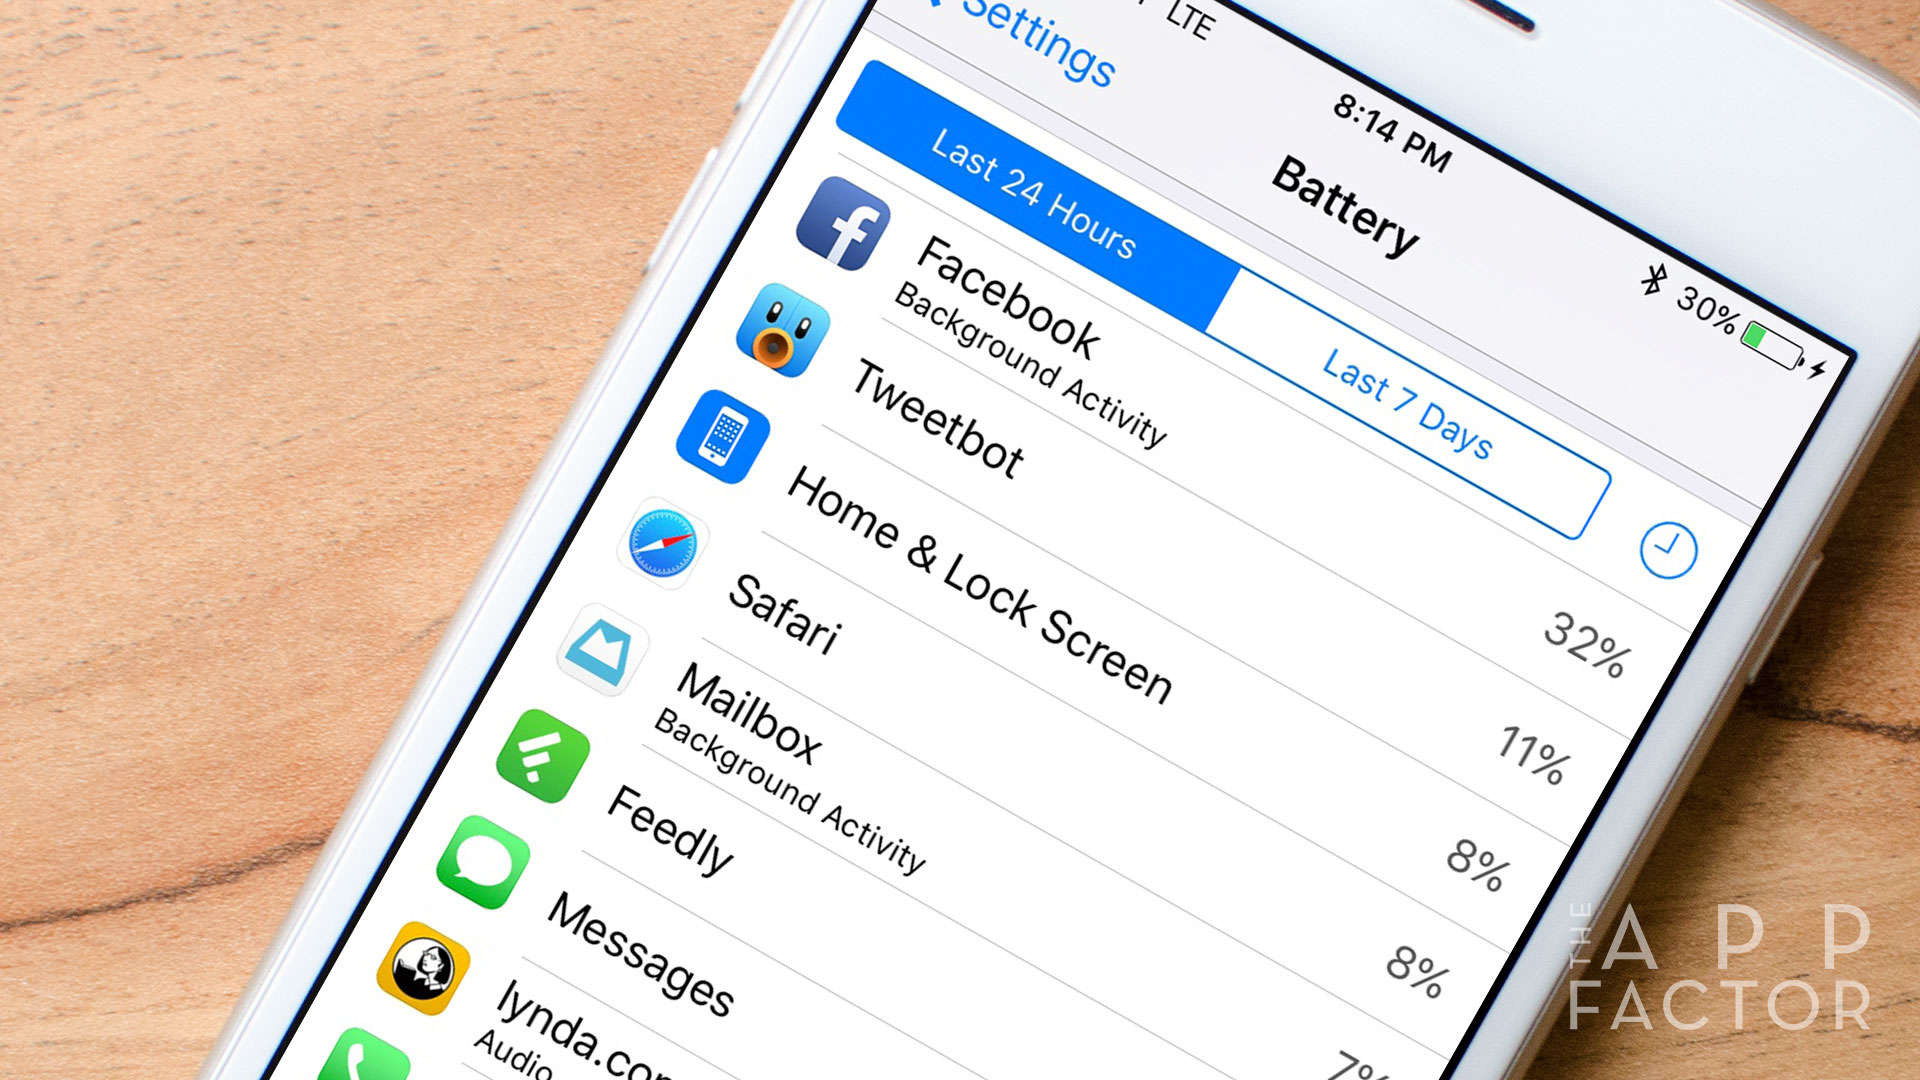 If you're tired of the Facebook app draining your iPhone's battery, try these 6 easy tips!